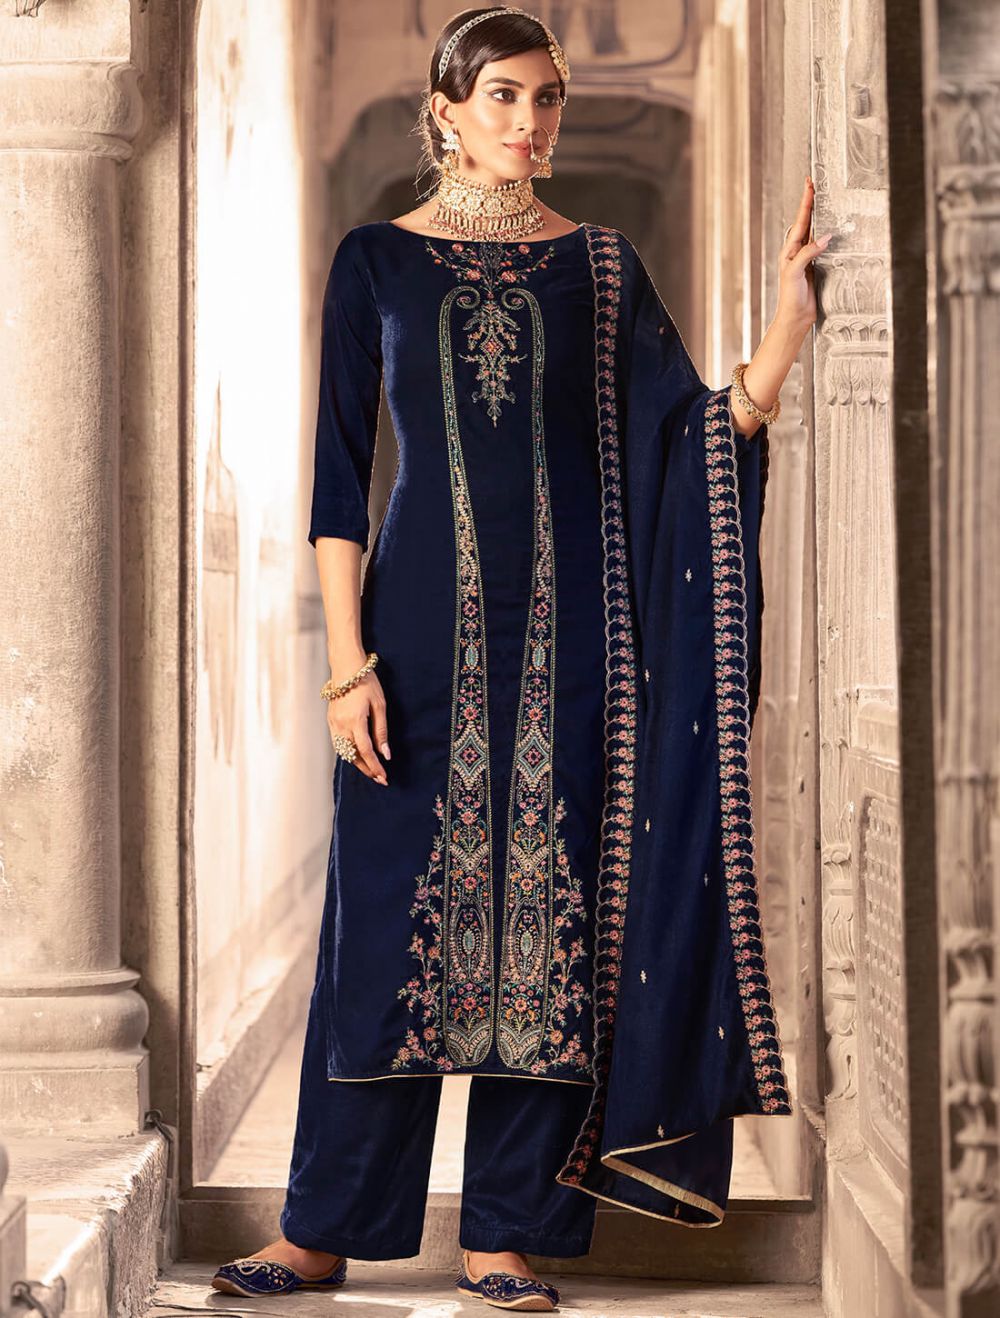 What Are the Steps to Measure for Salwar Kameez?